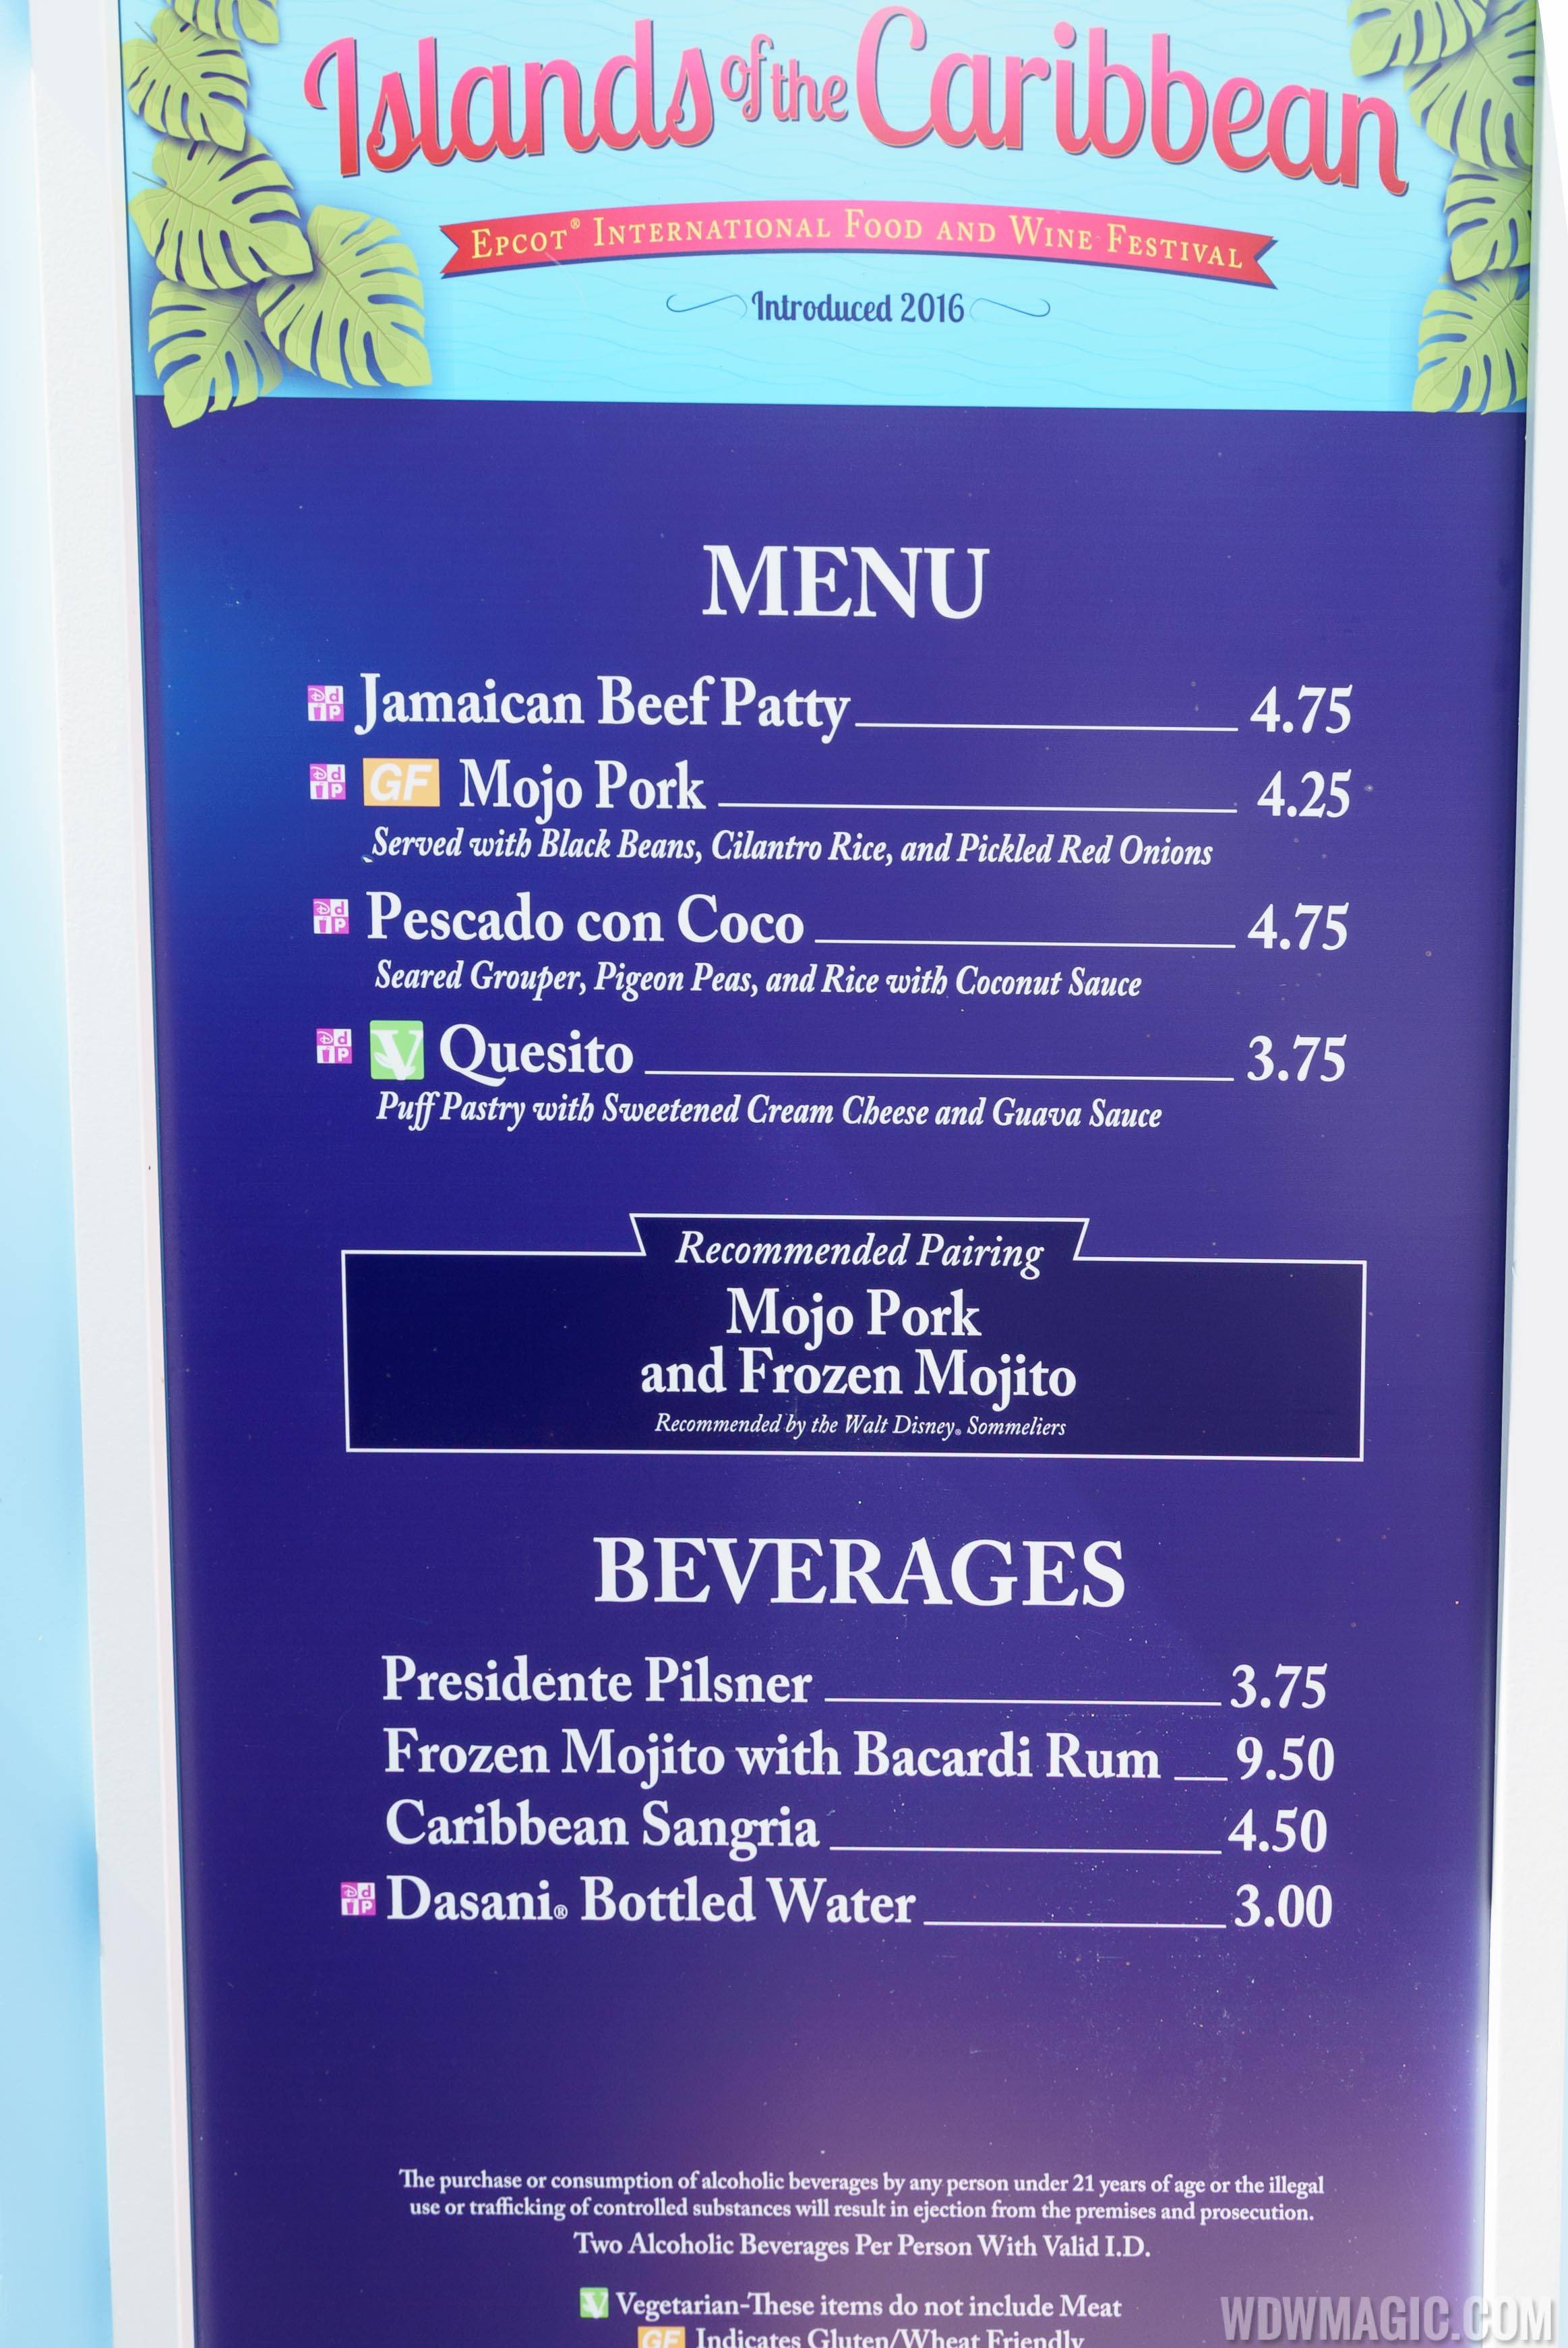 2016 Epcot Food and Wine Festival - Islands of the Caribbean menu